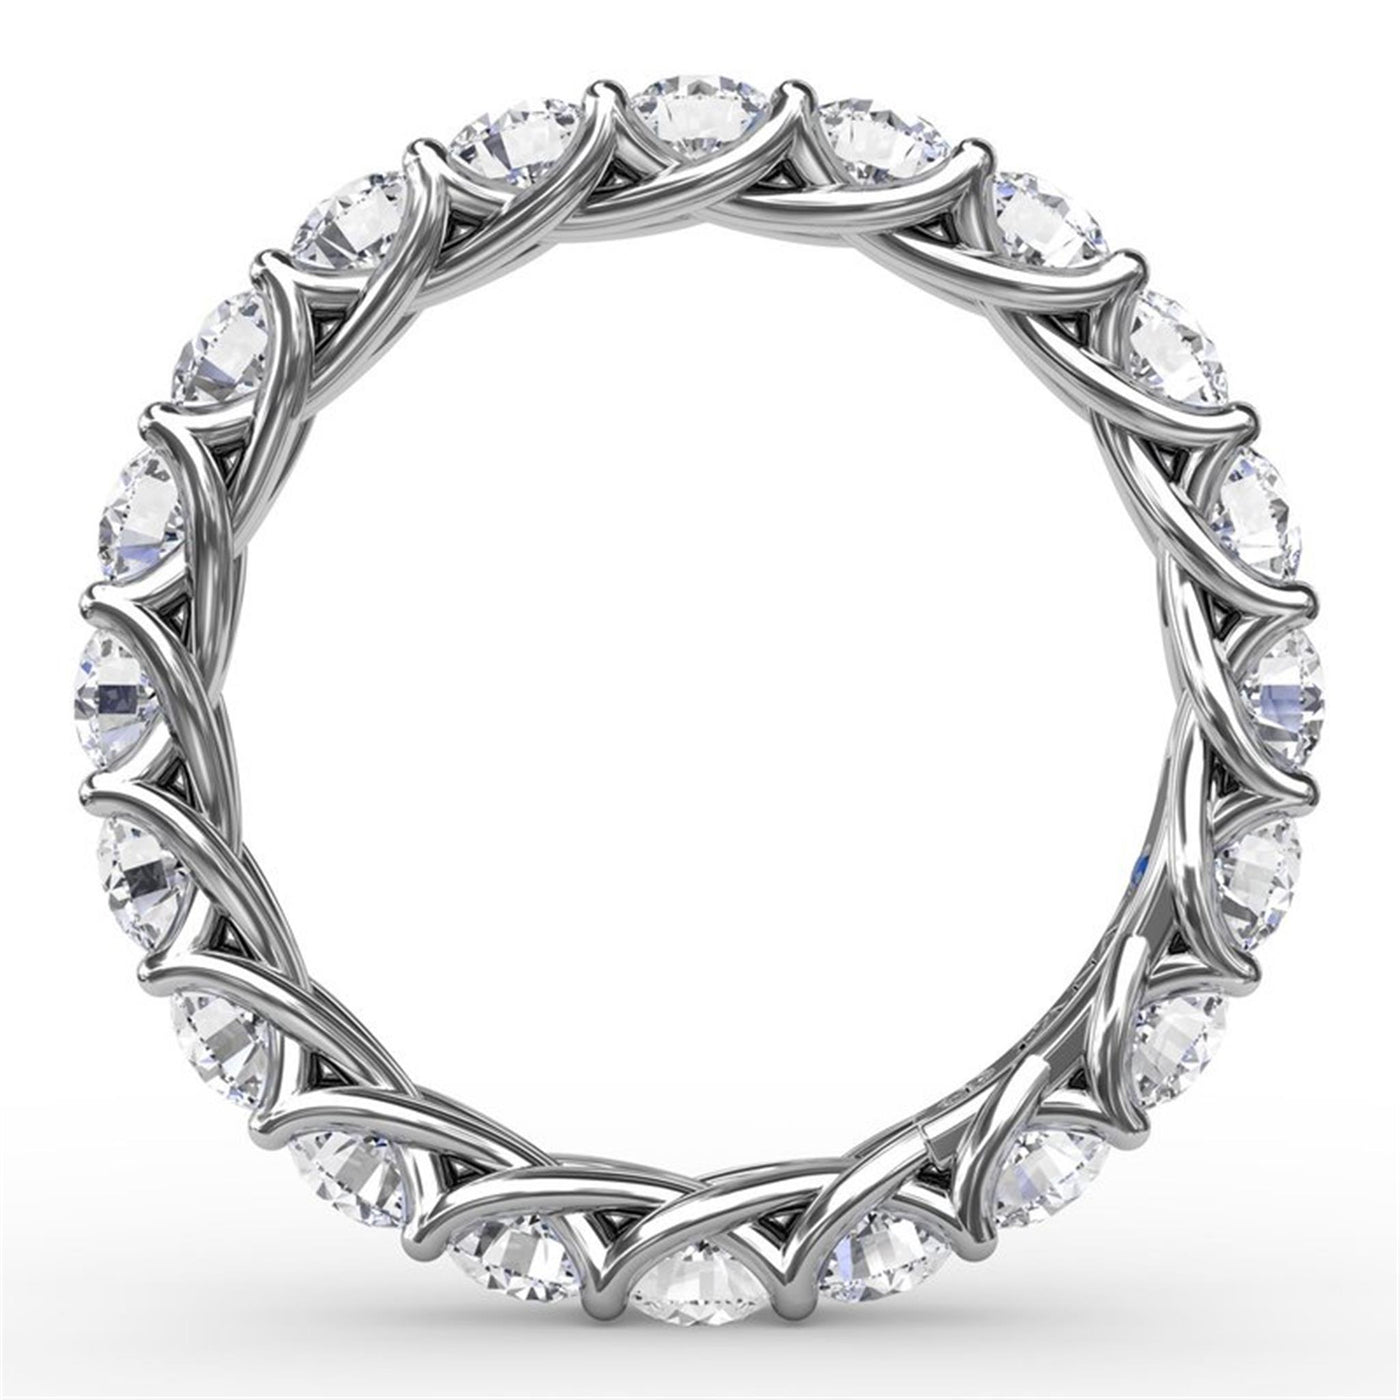 14K White Gold 2.54ctw Diamond Eternity Band 
Featuring a Polished Finish